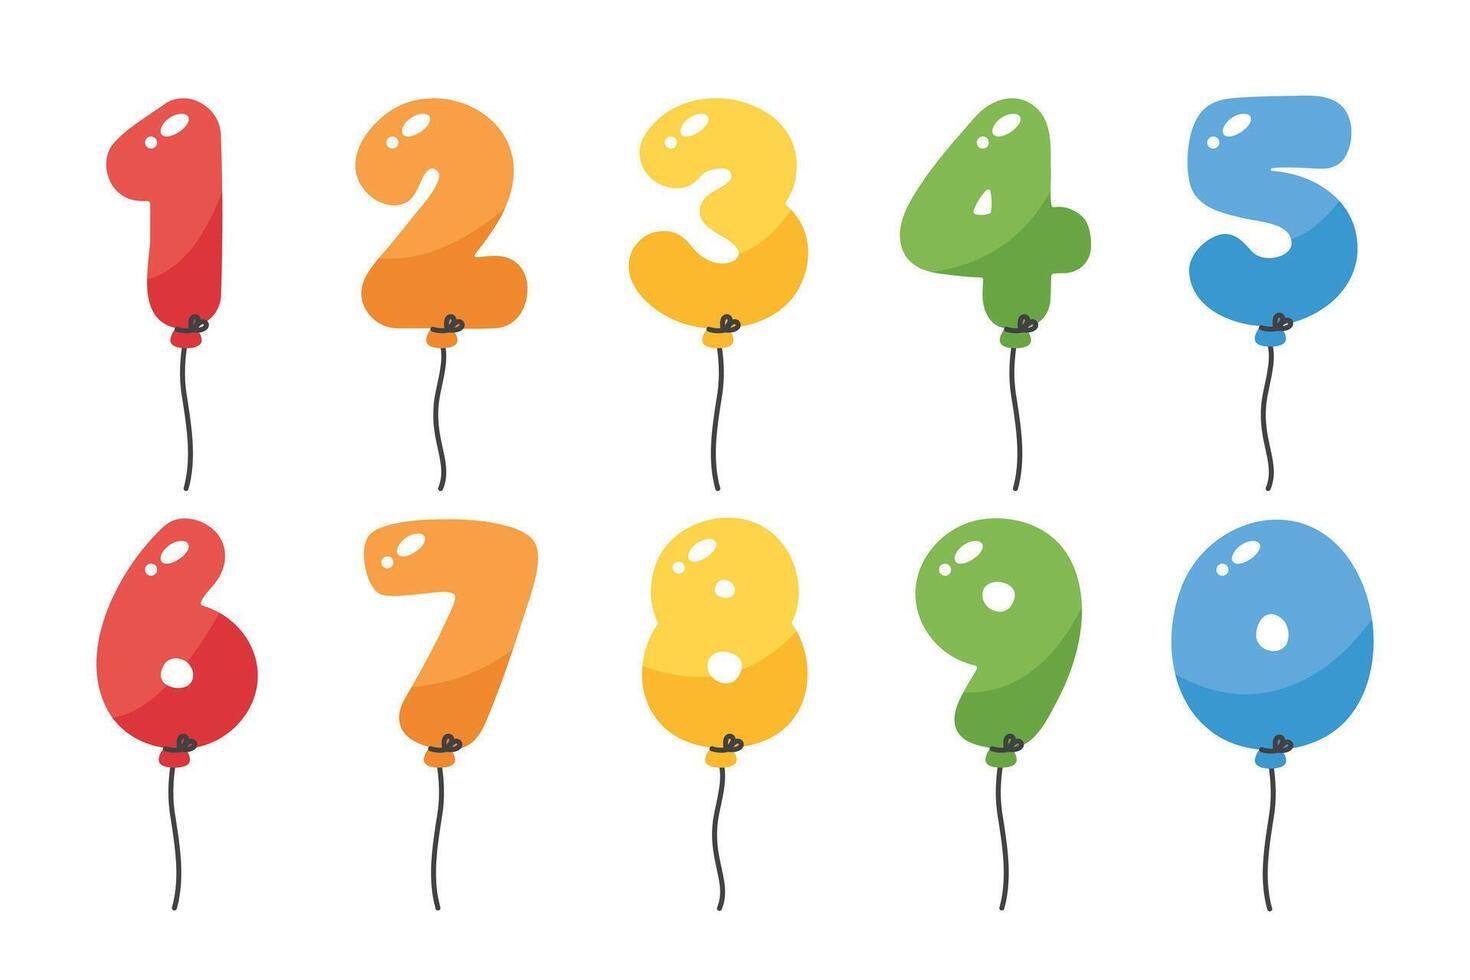 Colorful and playful number shaped balloons for kids, from zero to nine. Vector illustration.